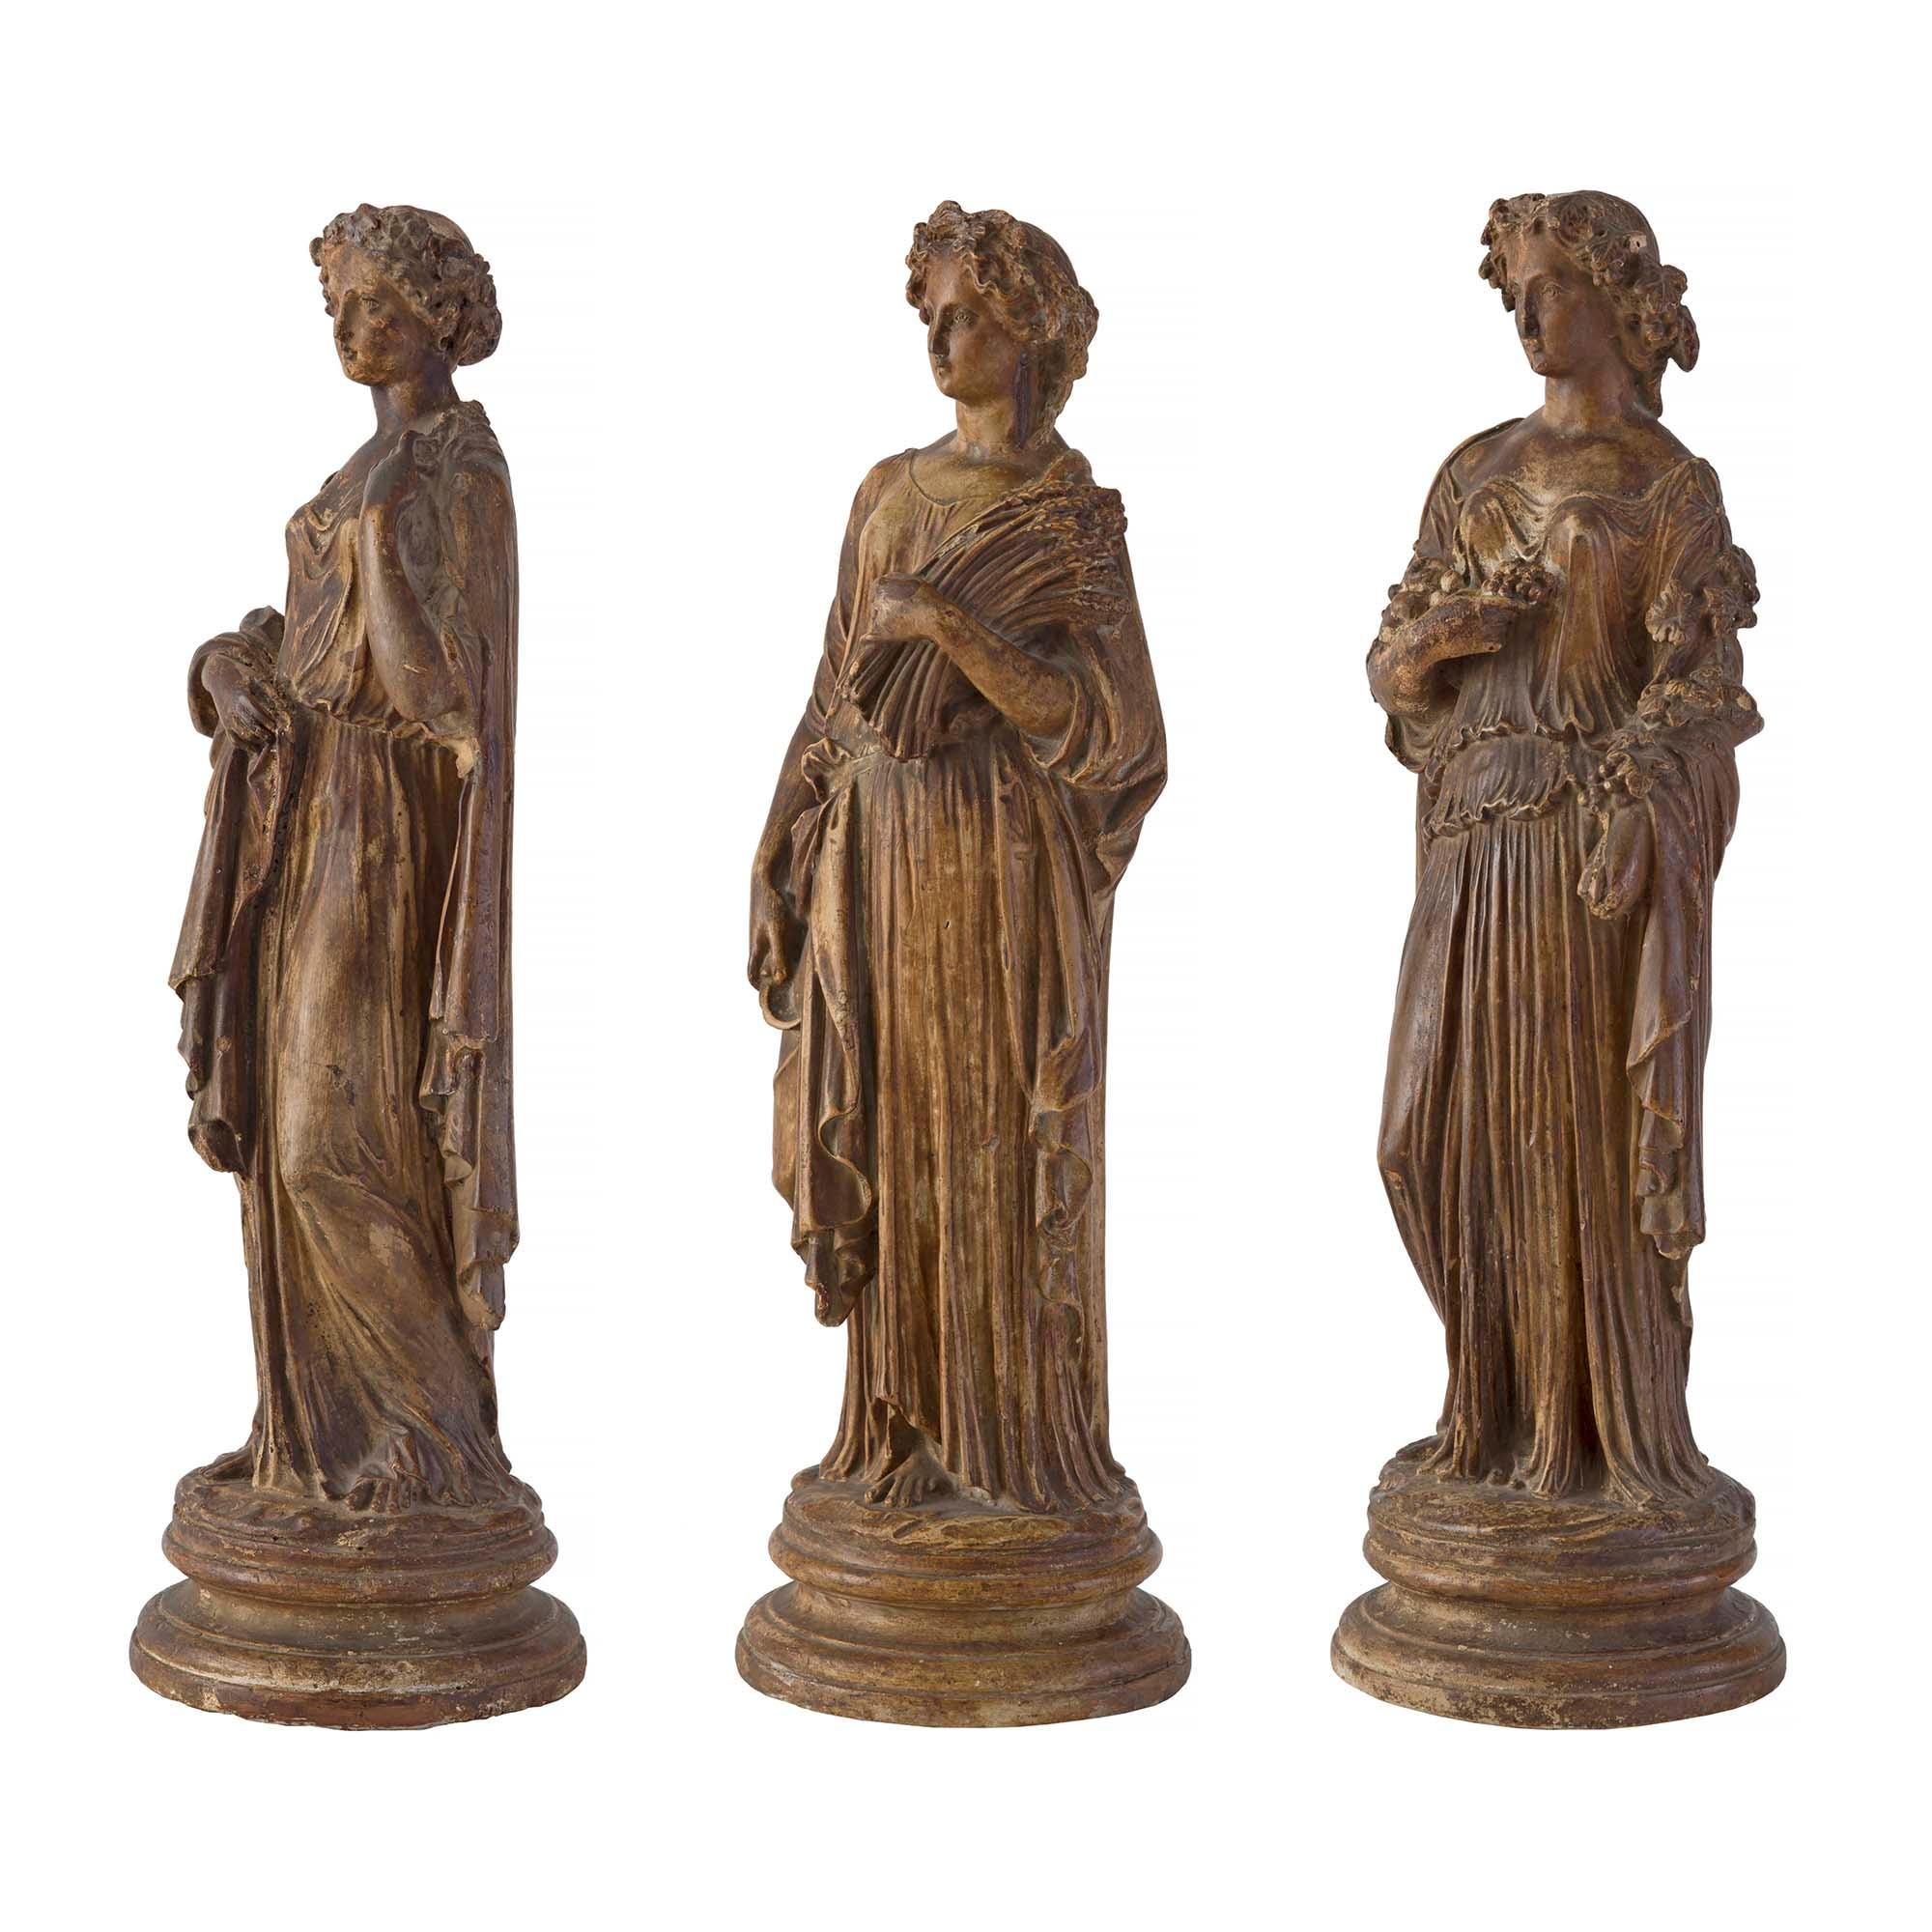 Set of Three Italian Early 18th Century Neoclassical Period Terracotta Statues In Good Condition For Sale In West Palm Beach, FL